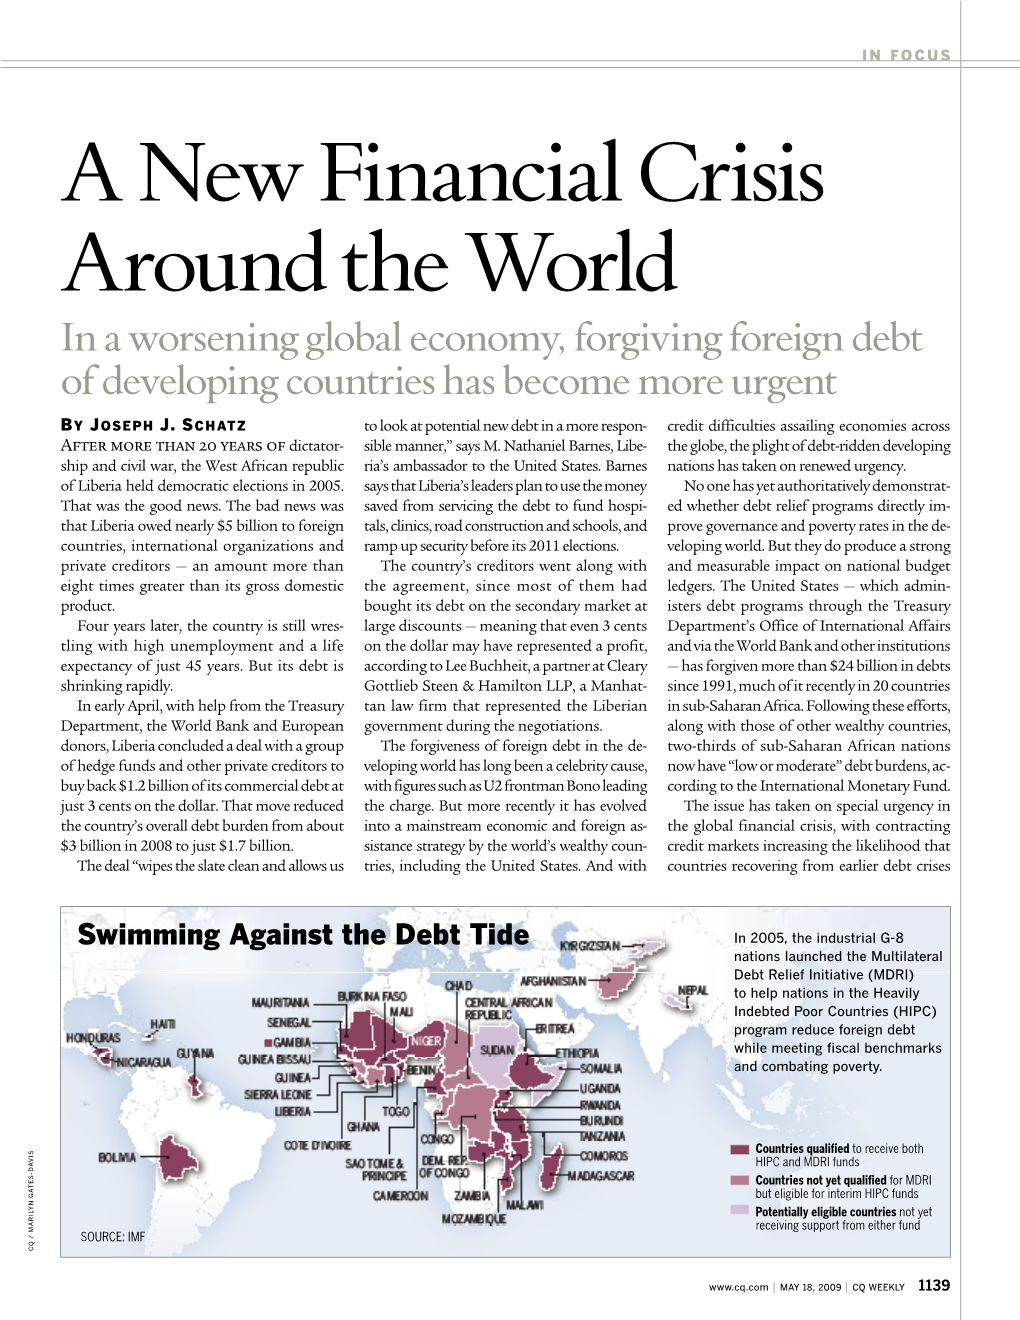 A New Financial Crisis Around the World in a Worsening Global Economy, Forgiving Foreign Debt of Developing Countries Has Become More Urgent